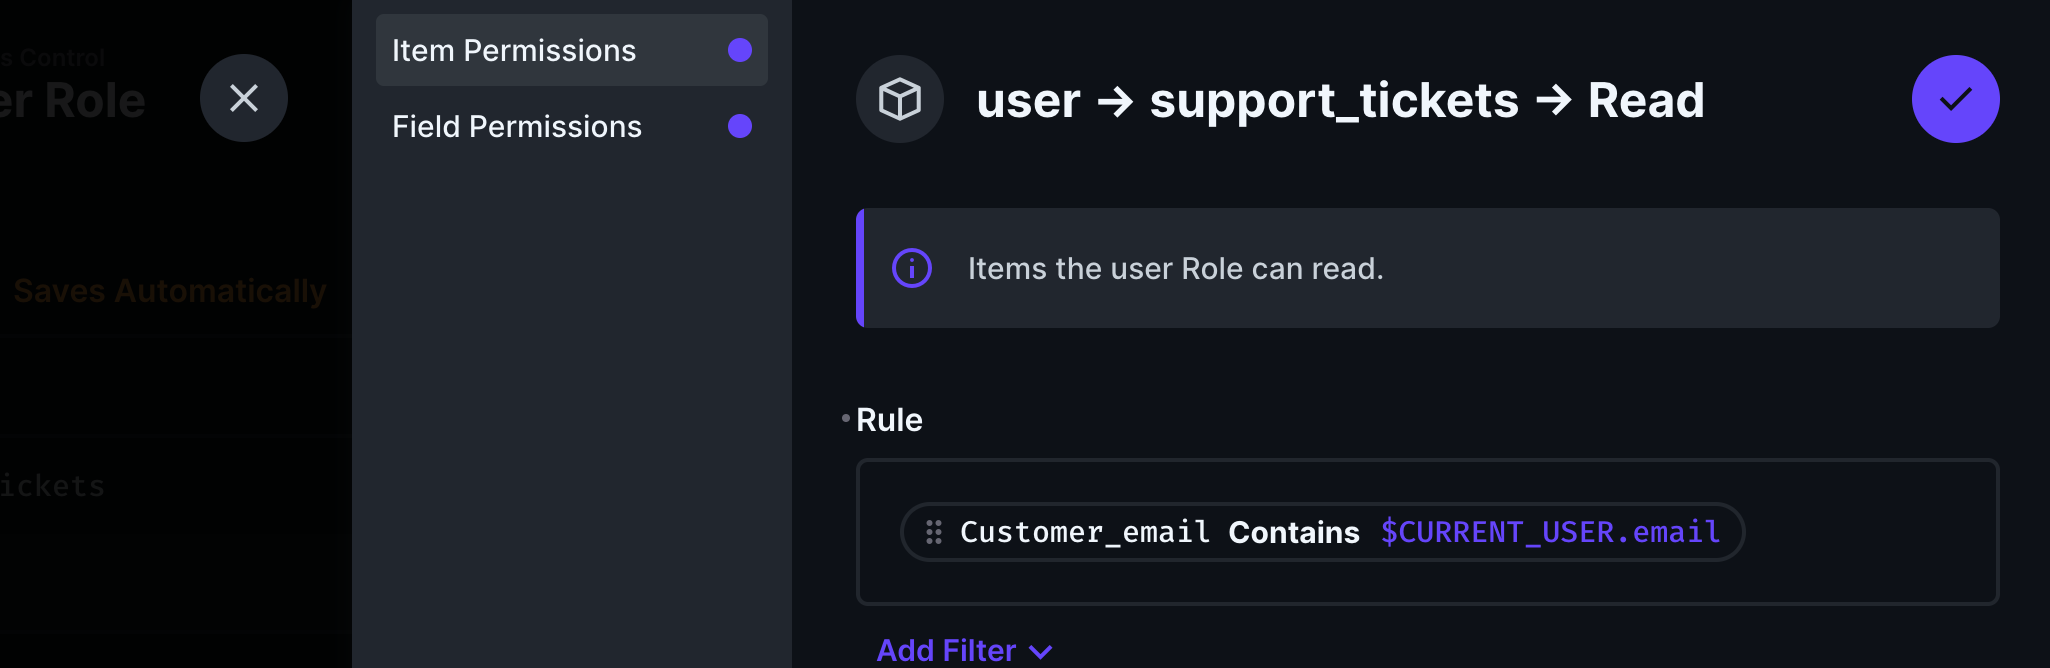 Applying rules to what user can see